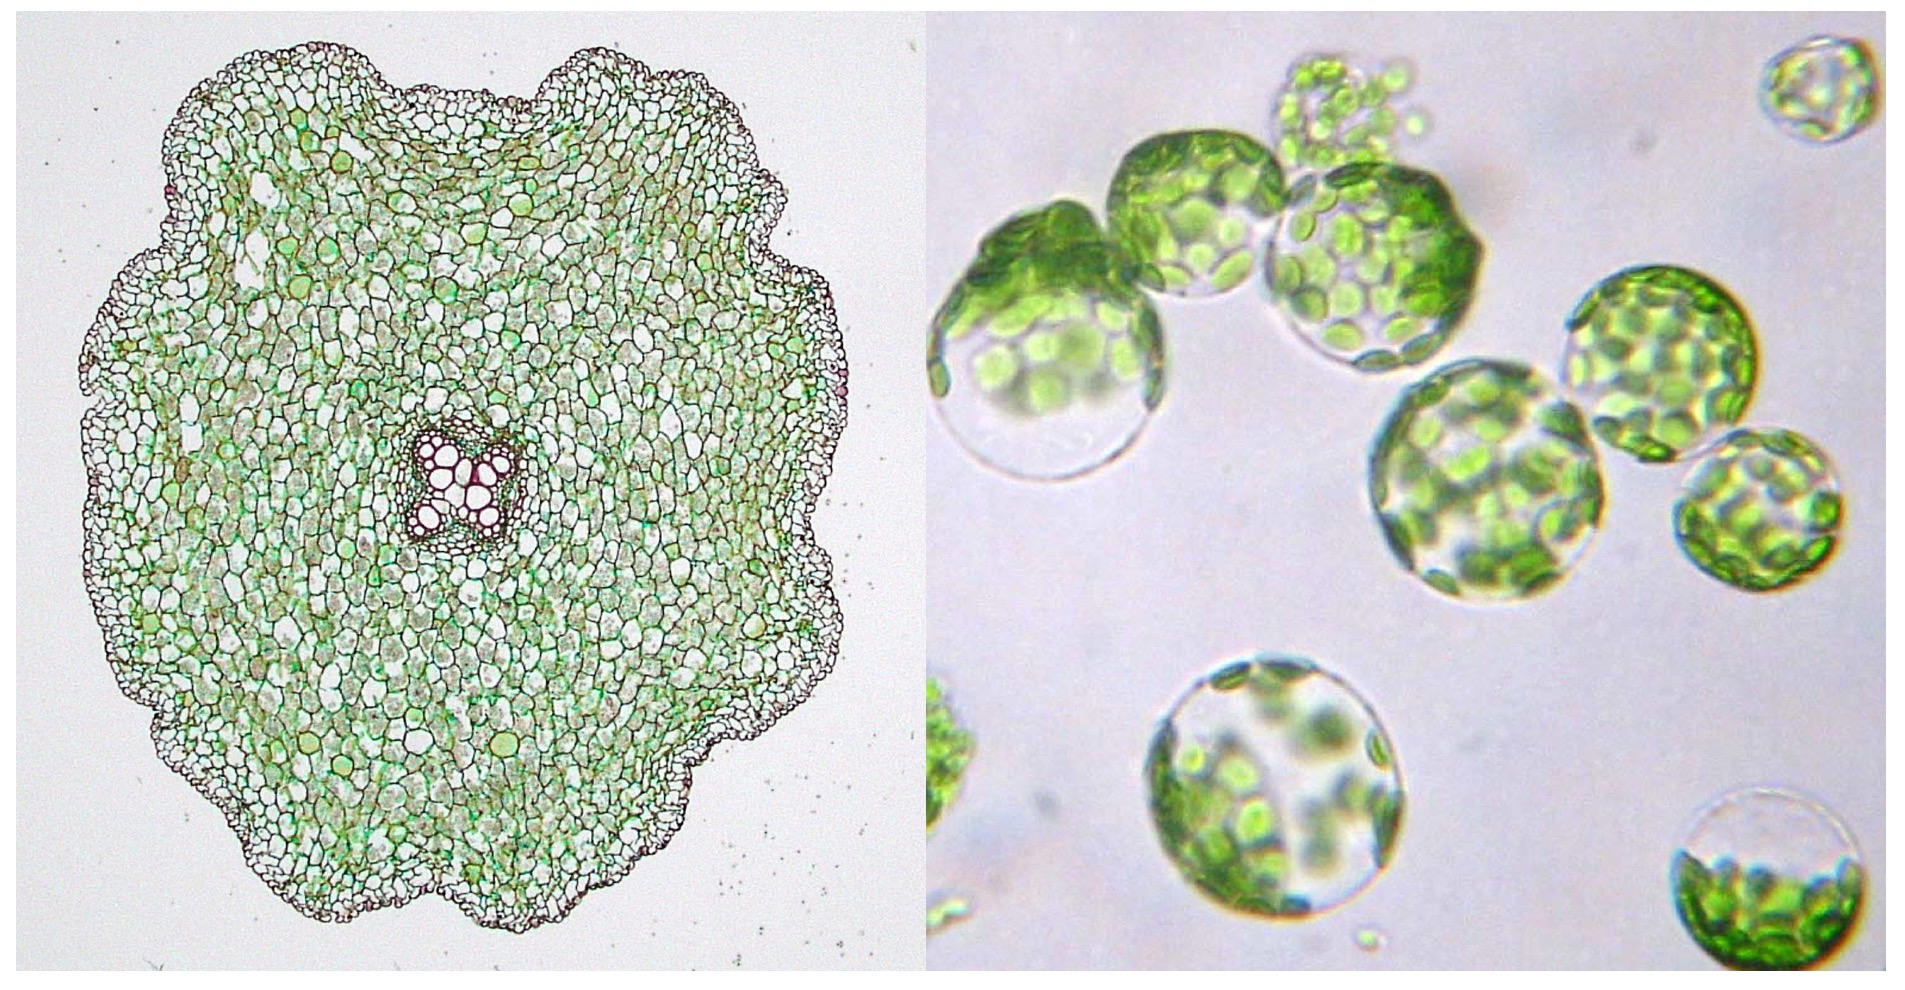 Microscope images of root cells in their natural state (left) and after protoplasting (right)